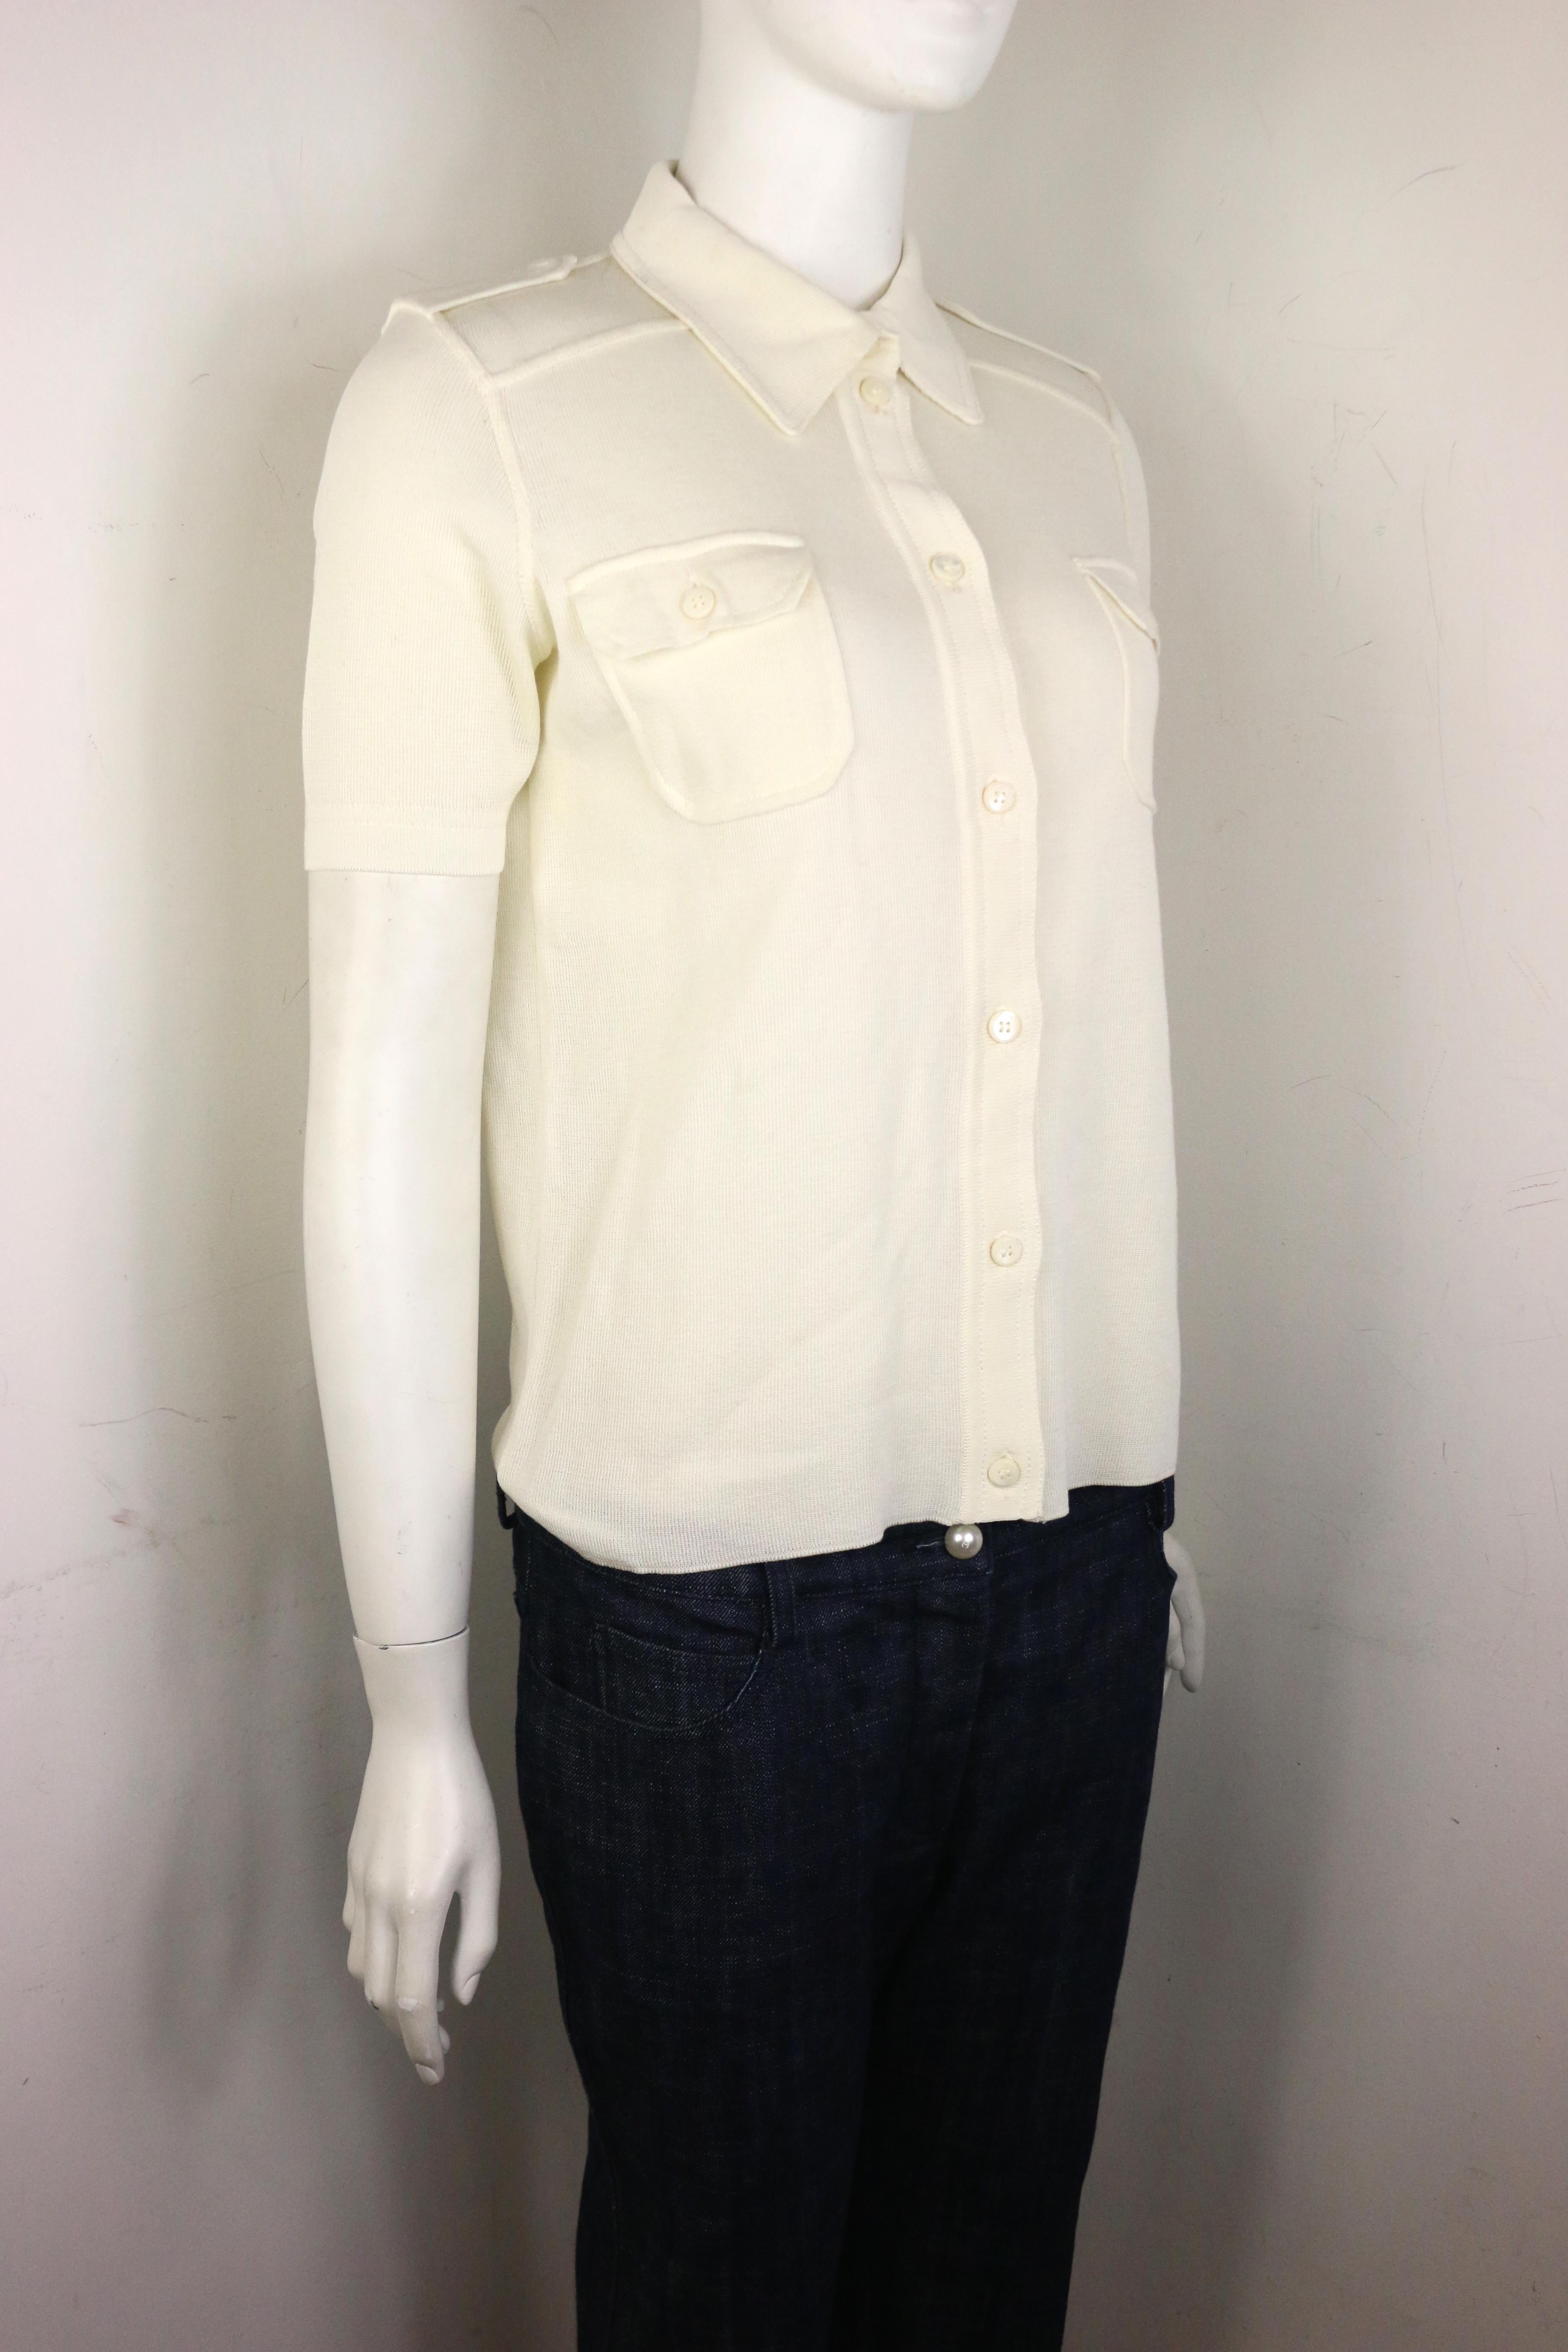 - Vintage 90s Prada white cotton knitted short sleeves collar shirt. The style is fitted. 

- Featuring shoulder epaulettes with button closure. Front buttons closure. Two front pockets with button closure. 

- Size 44. 

- 100% Cotton. 
